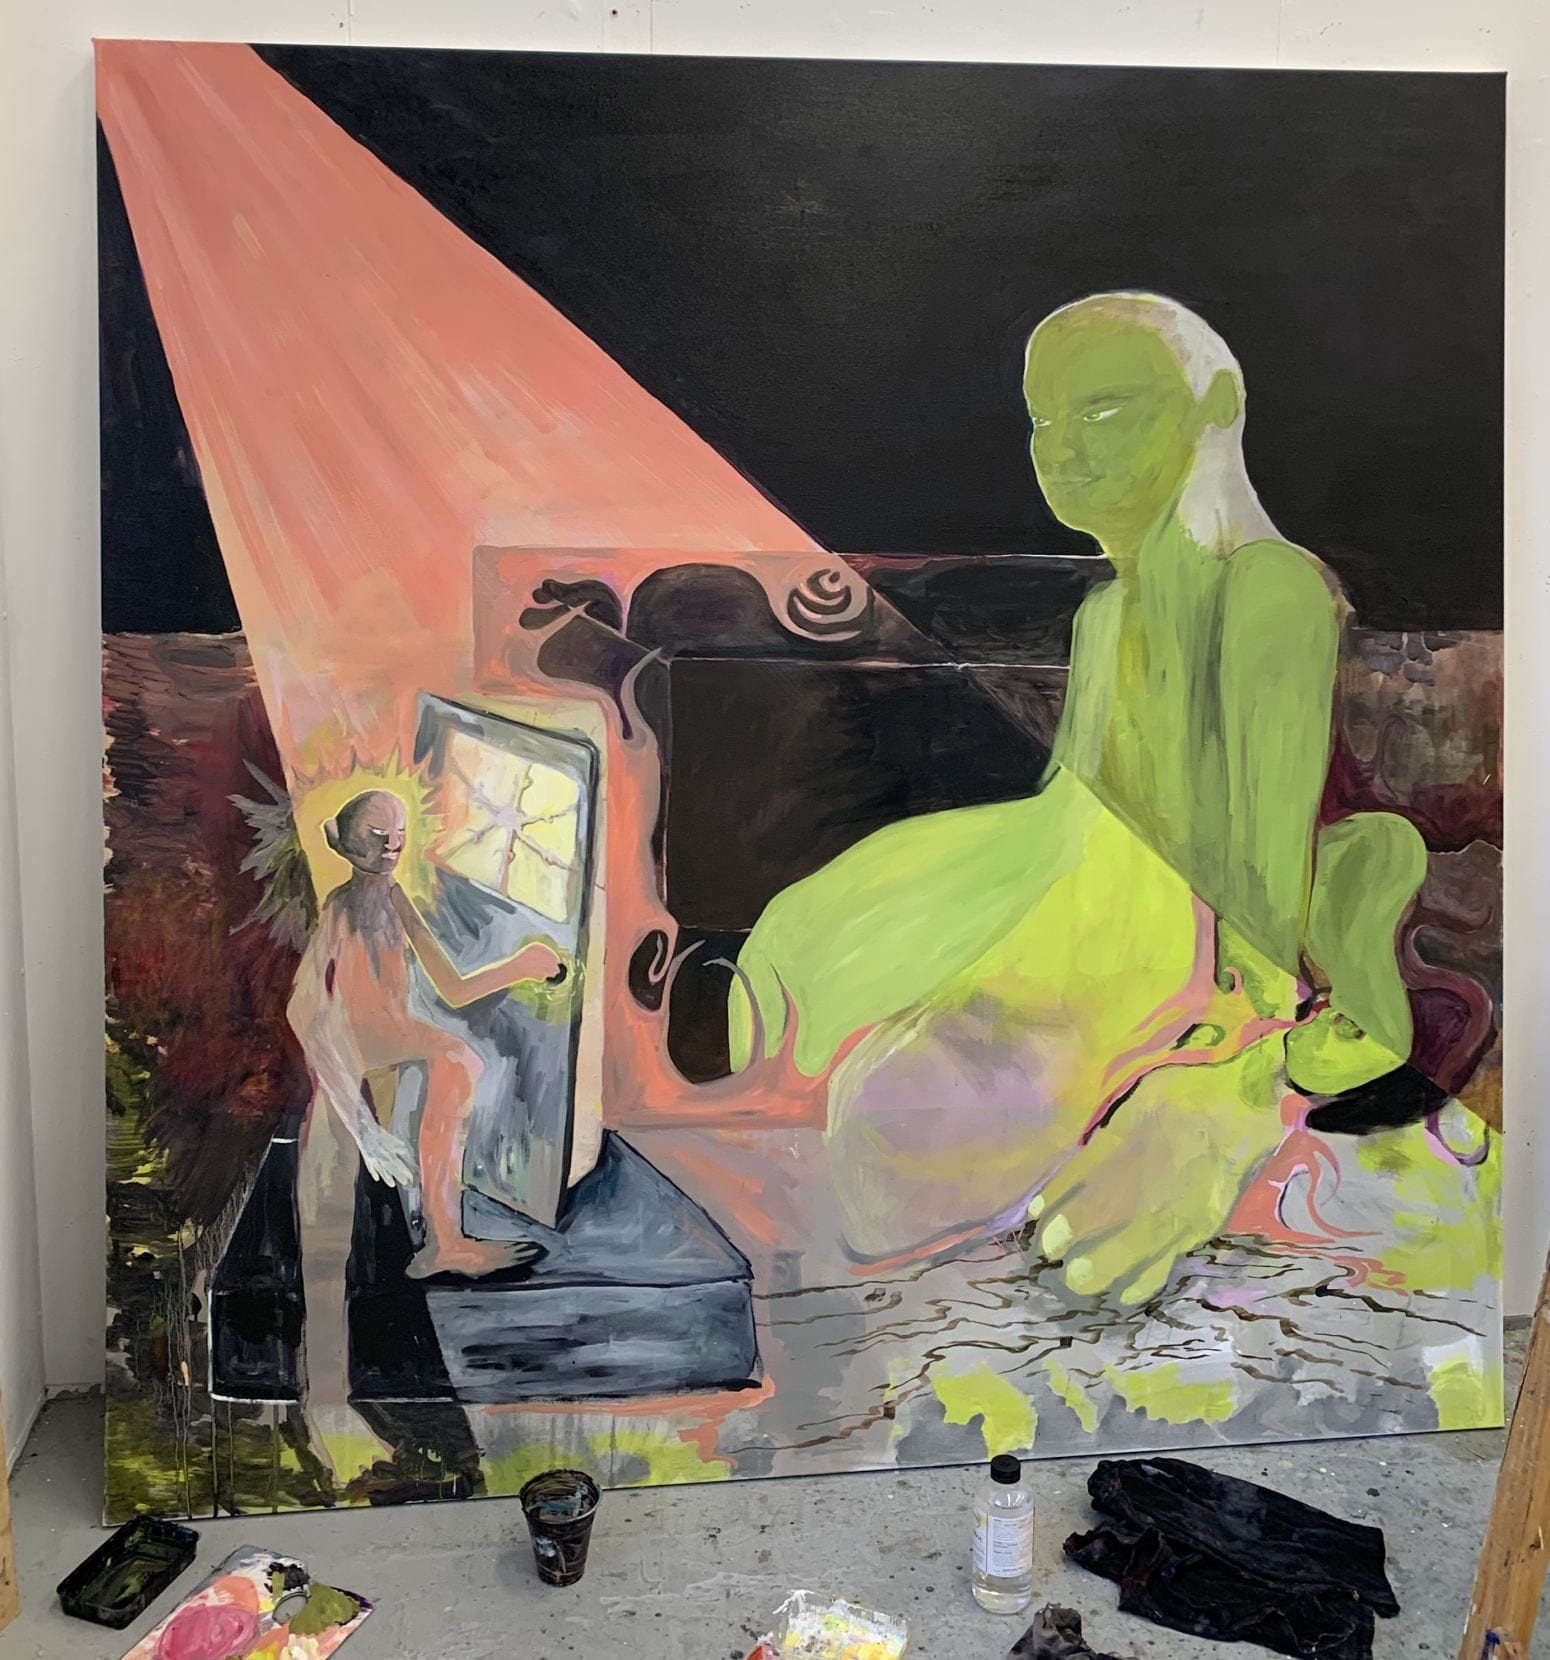 Large scale painting in studio space